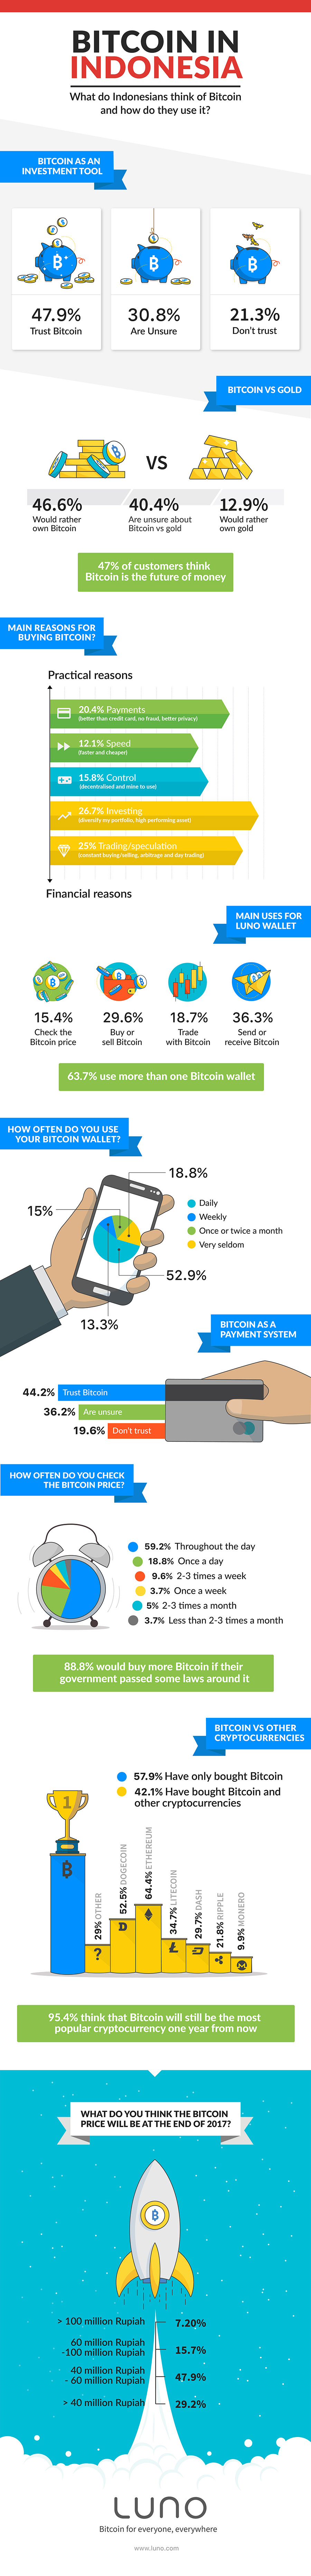 How-Indonesians-use-Bitcoin_infographic